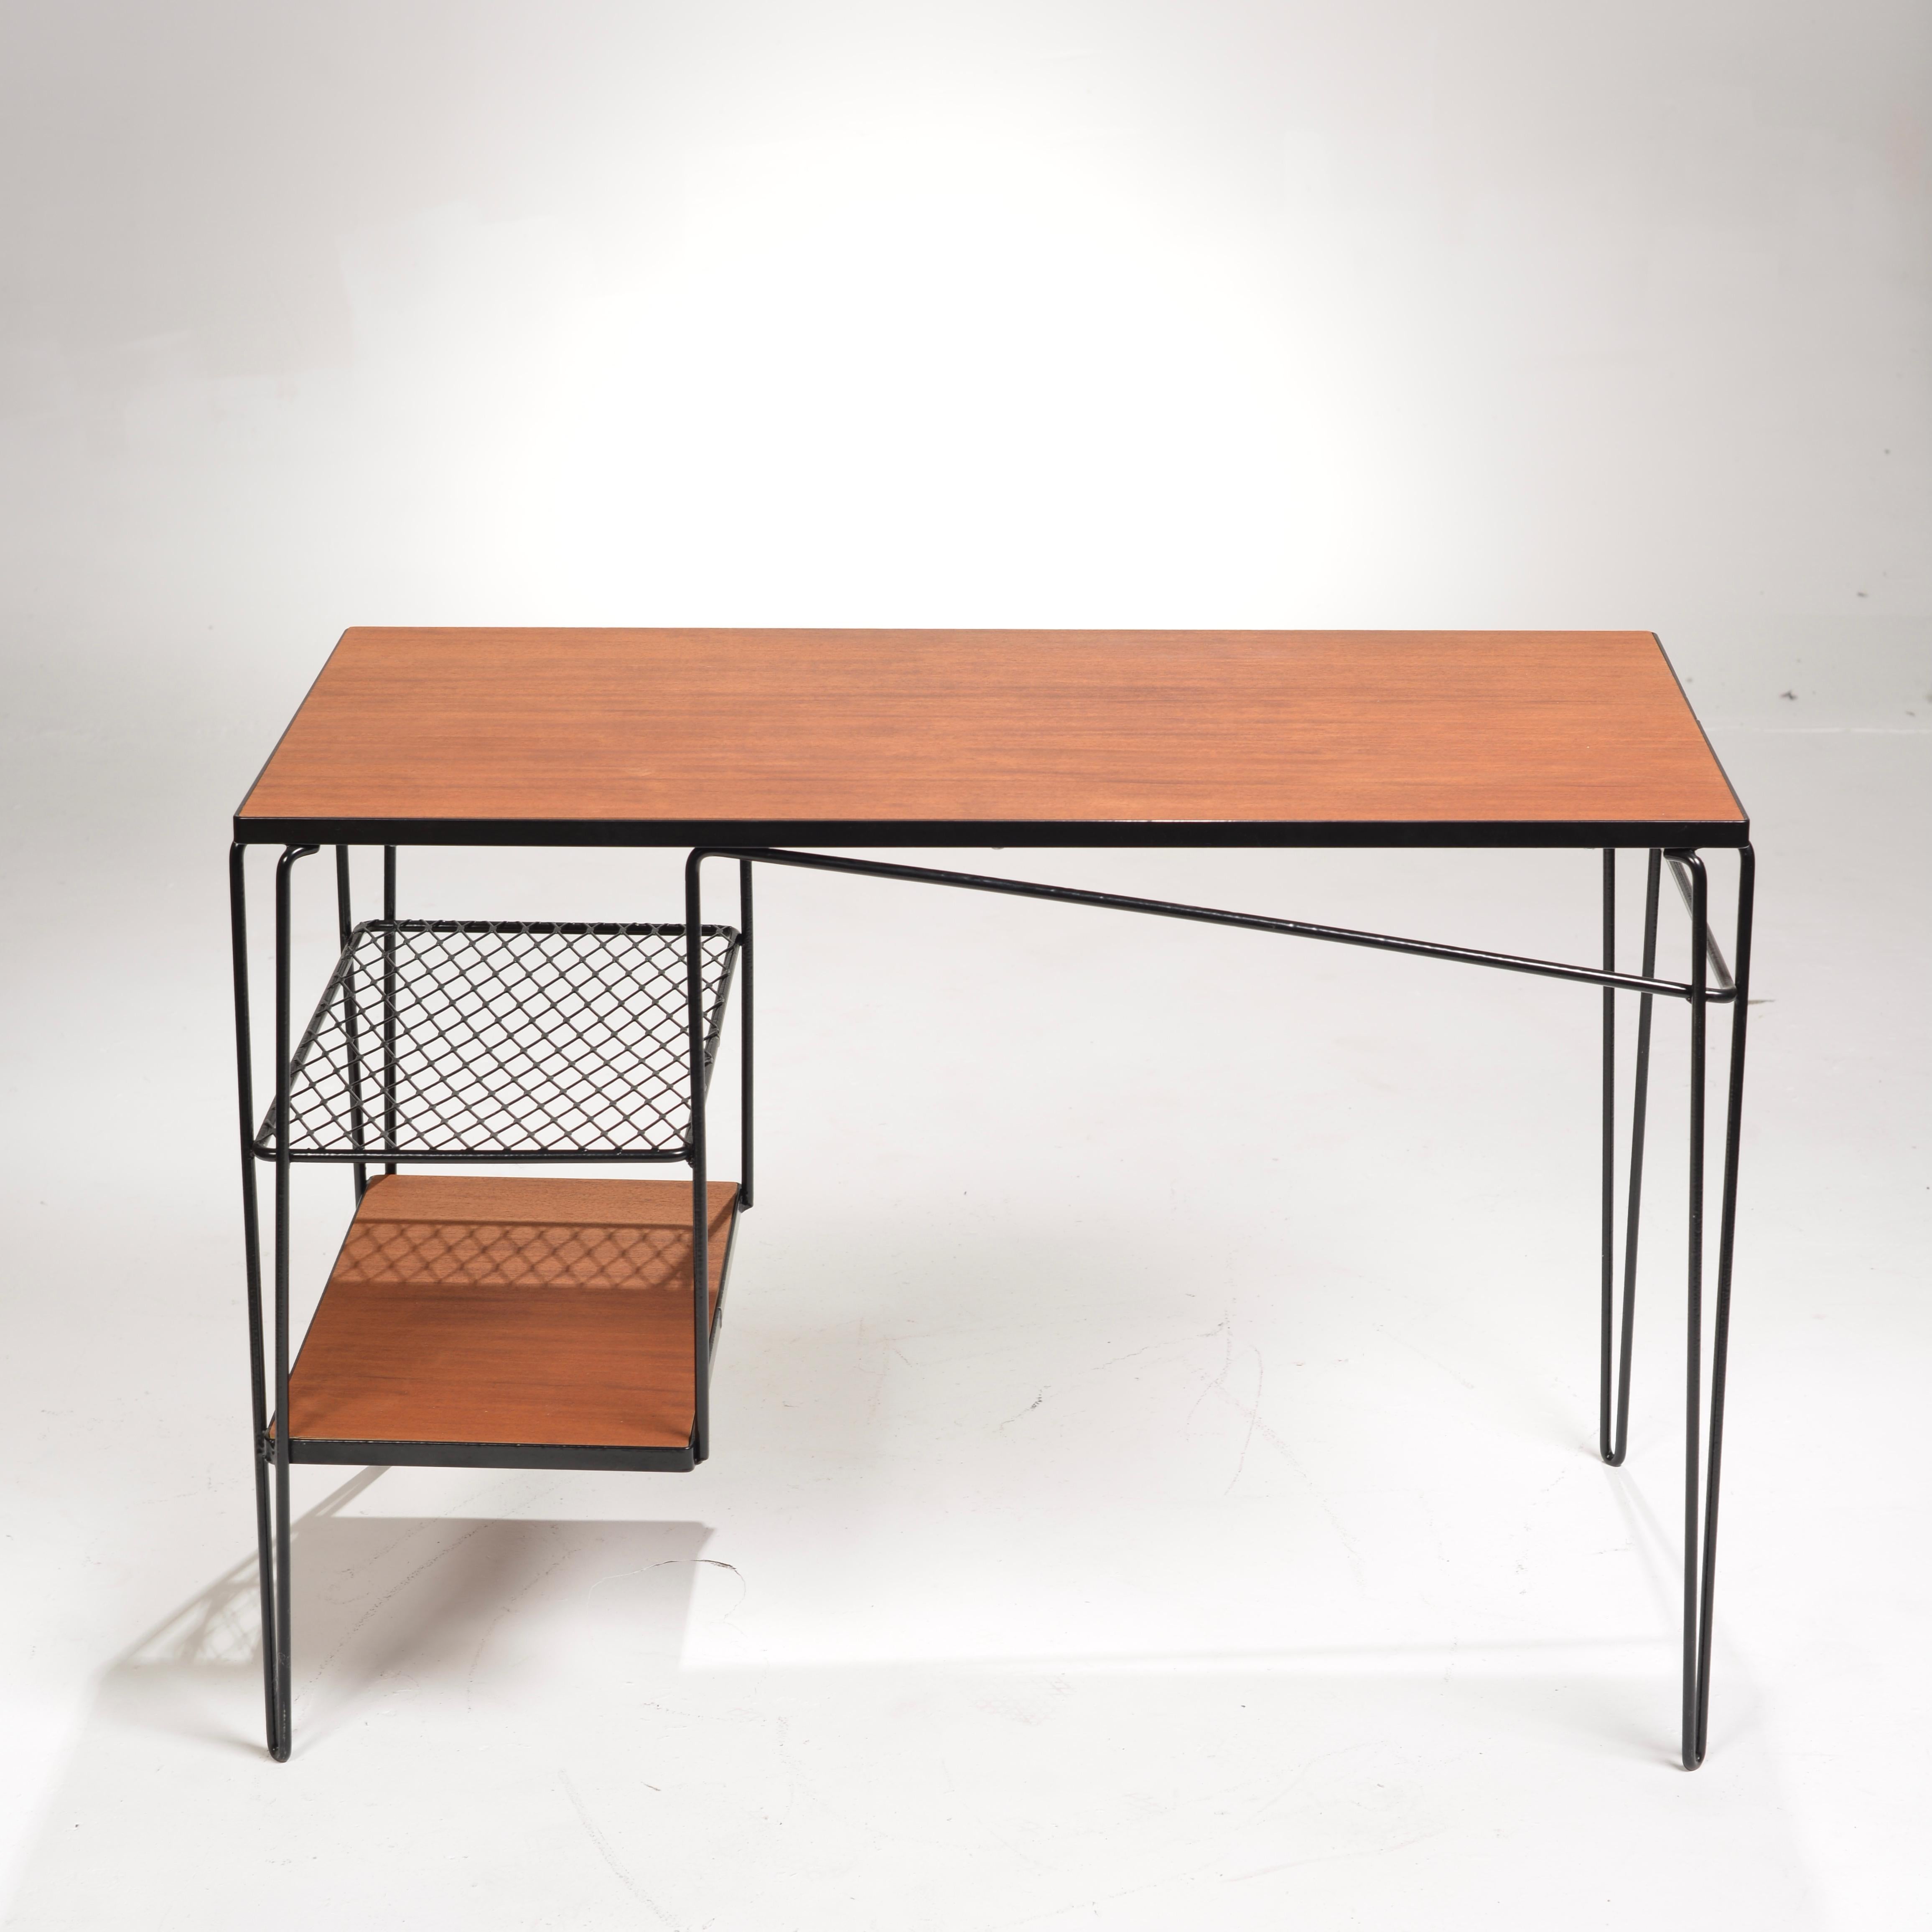 20th Century Pacific Design School Mahogany Desk by Thin Line of Los Angeles For Sale